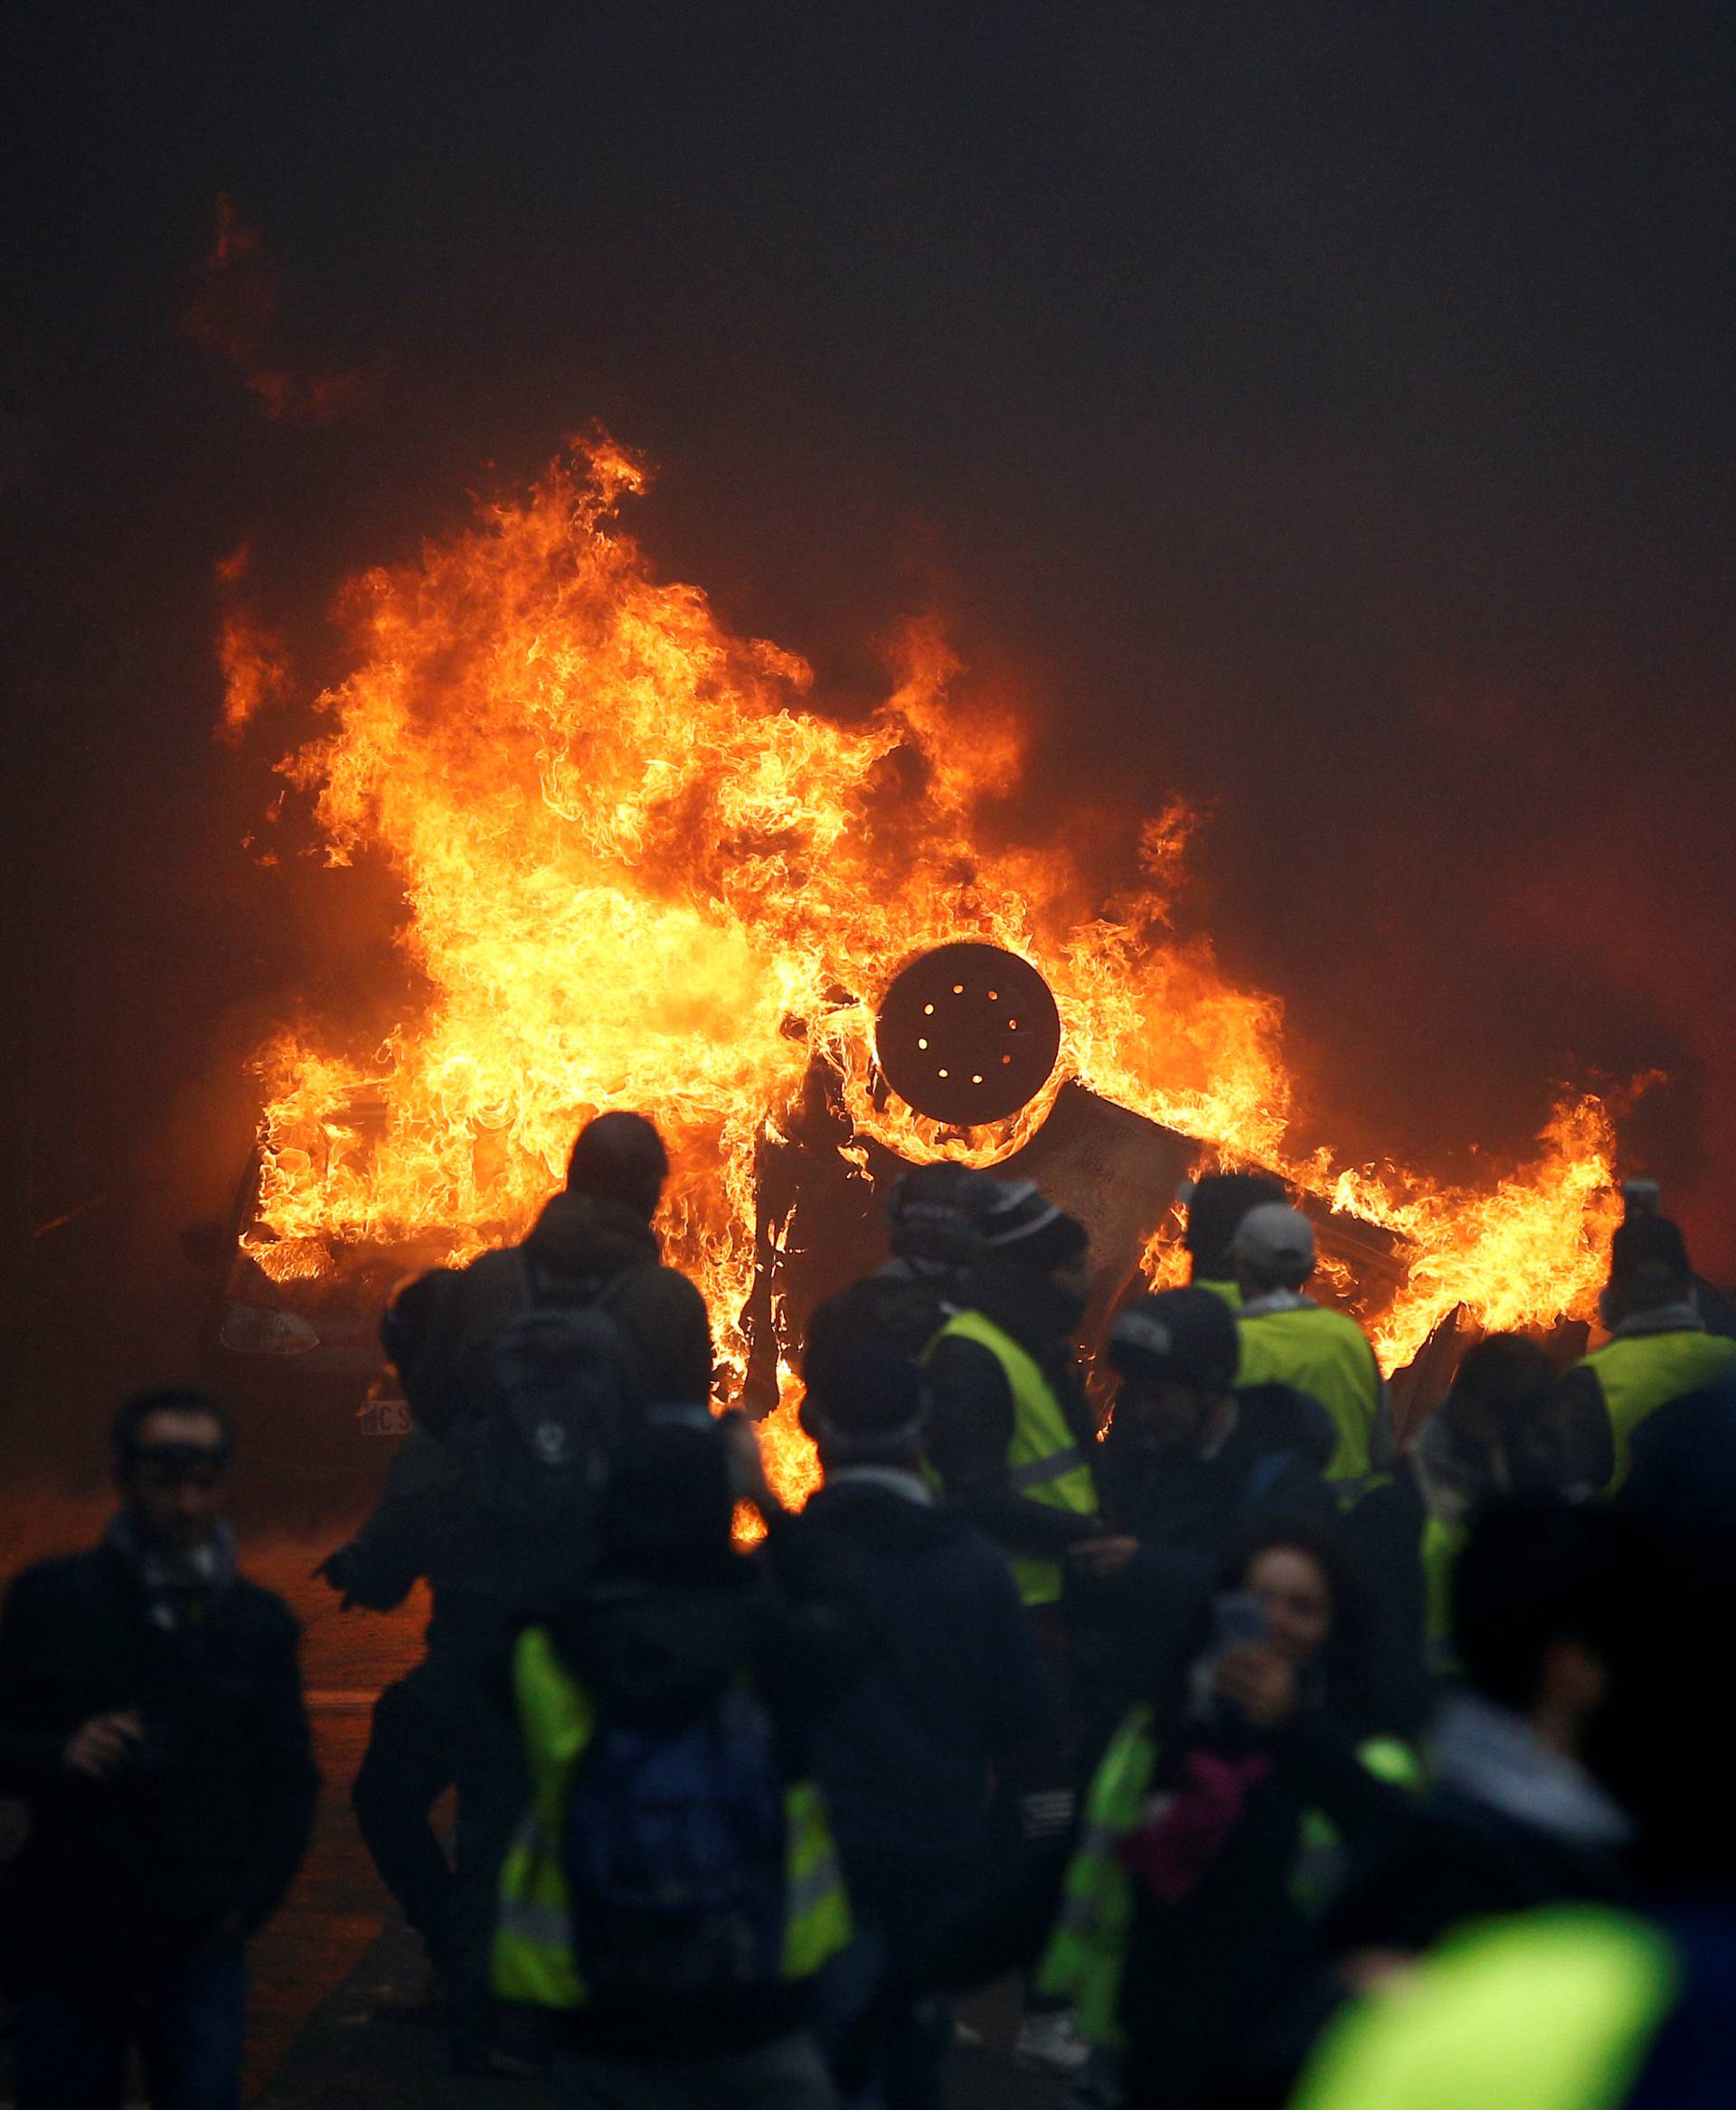 Protesters wearing yellow vests, a symbol of a French drivers' protest against higher diesel fuel taxes, gather near a burning car during clashes near the Place de l'Etoile in Paris